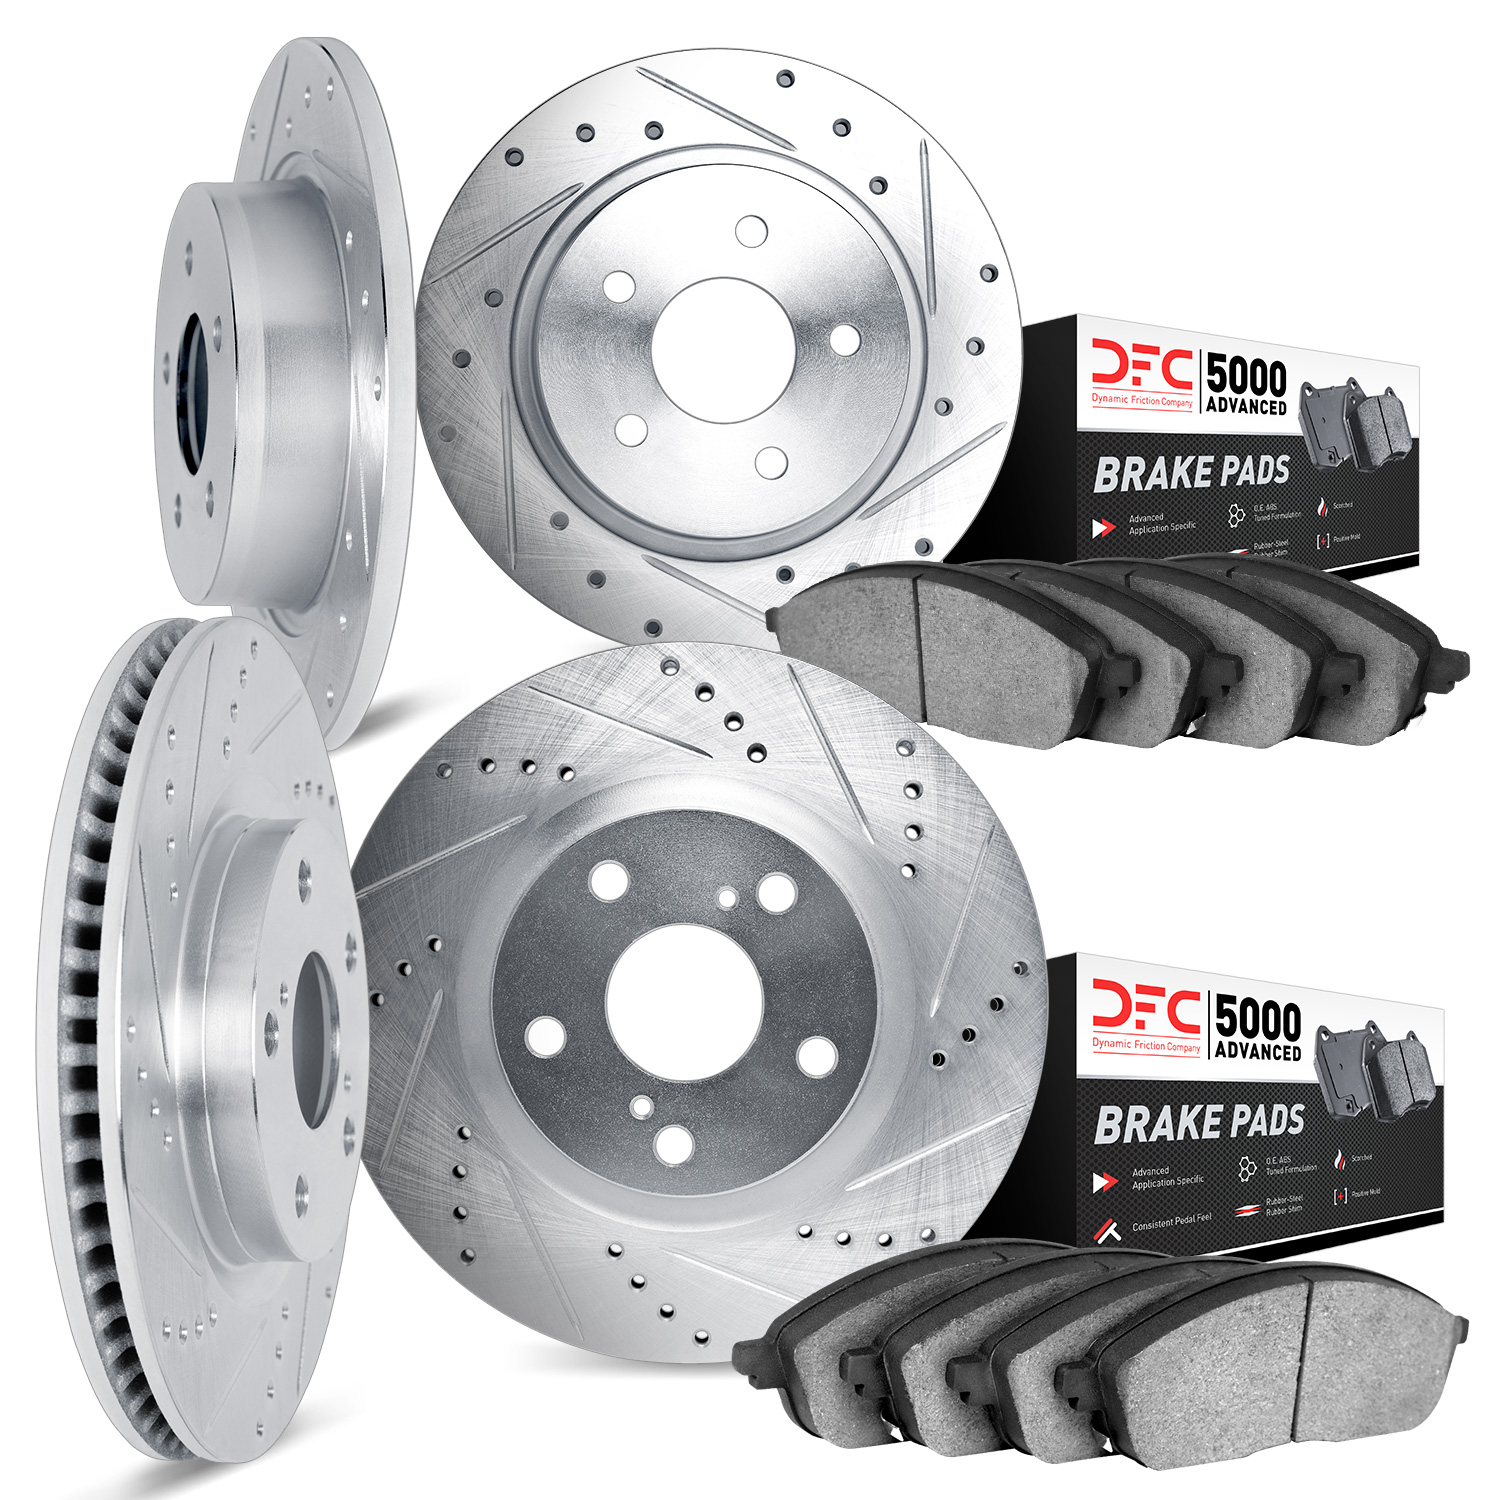 7504-75001 Drilled/Slotted Brake Rotors w/5000 Advanced Brake Pads Kit [Silver], 1998-2010 Lexus/Toyota/Scion, Position: Front a